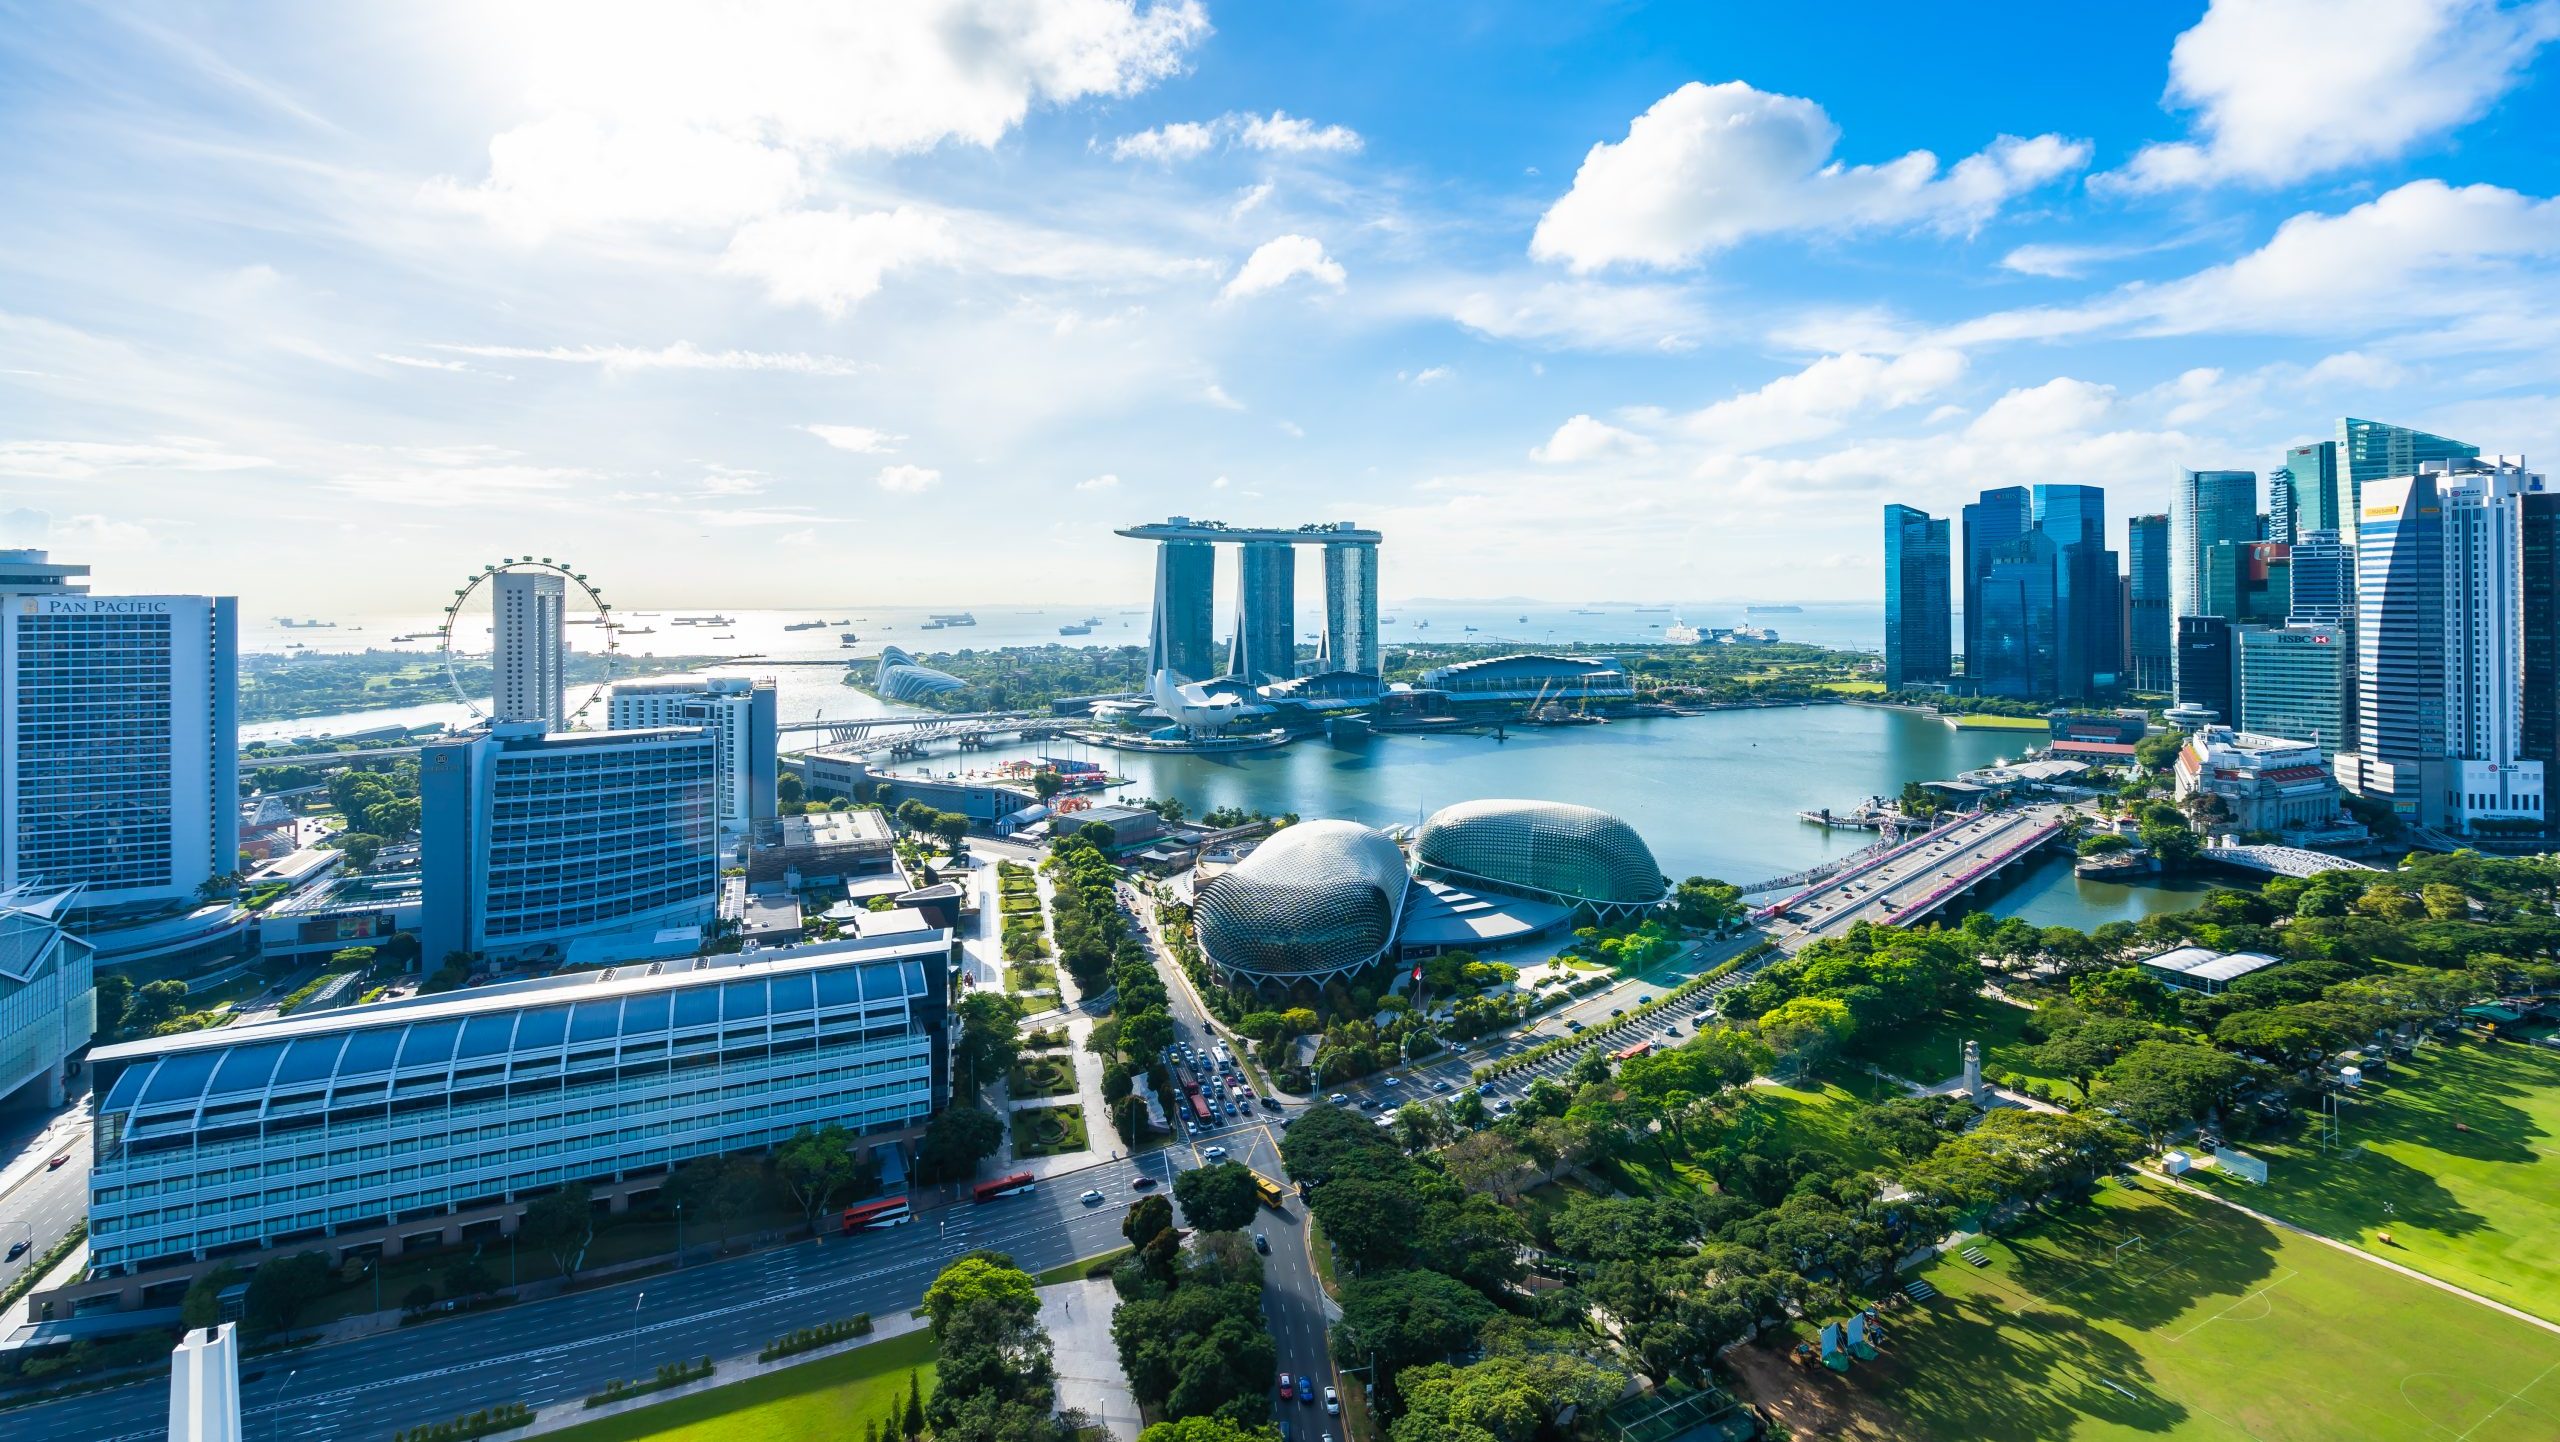 Singapore Travel Tips For First-Timers